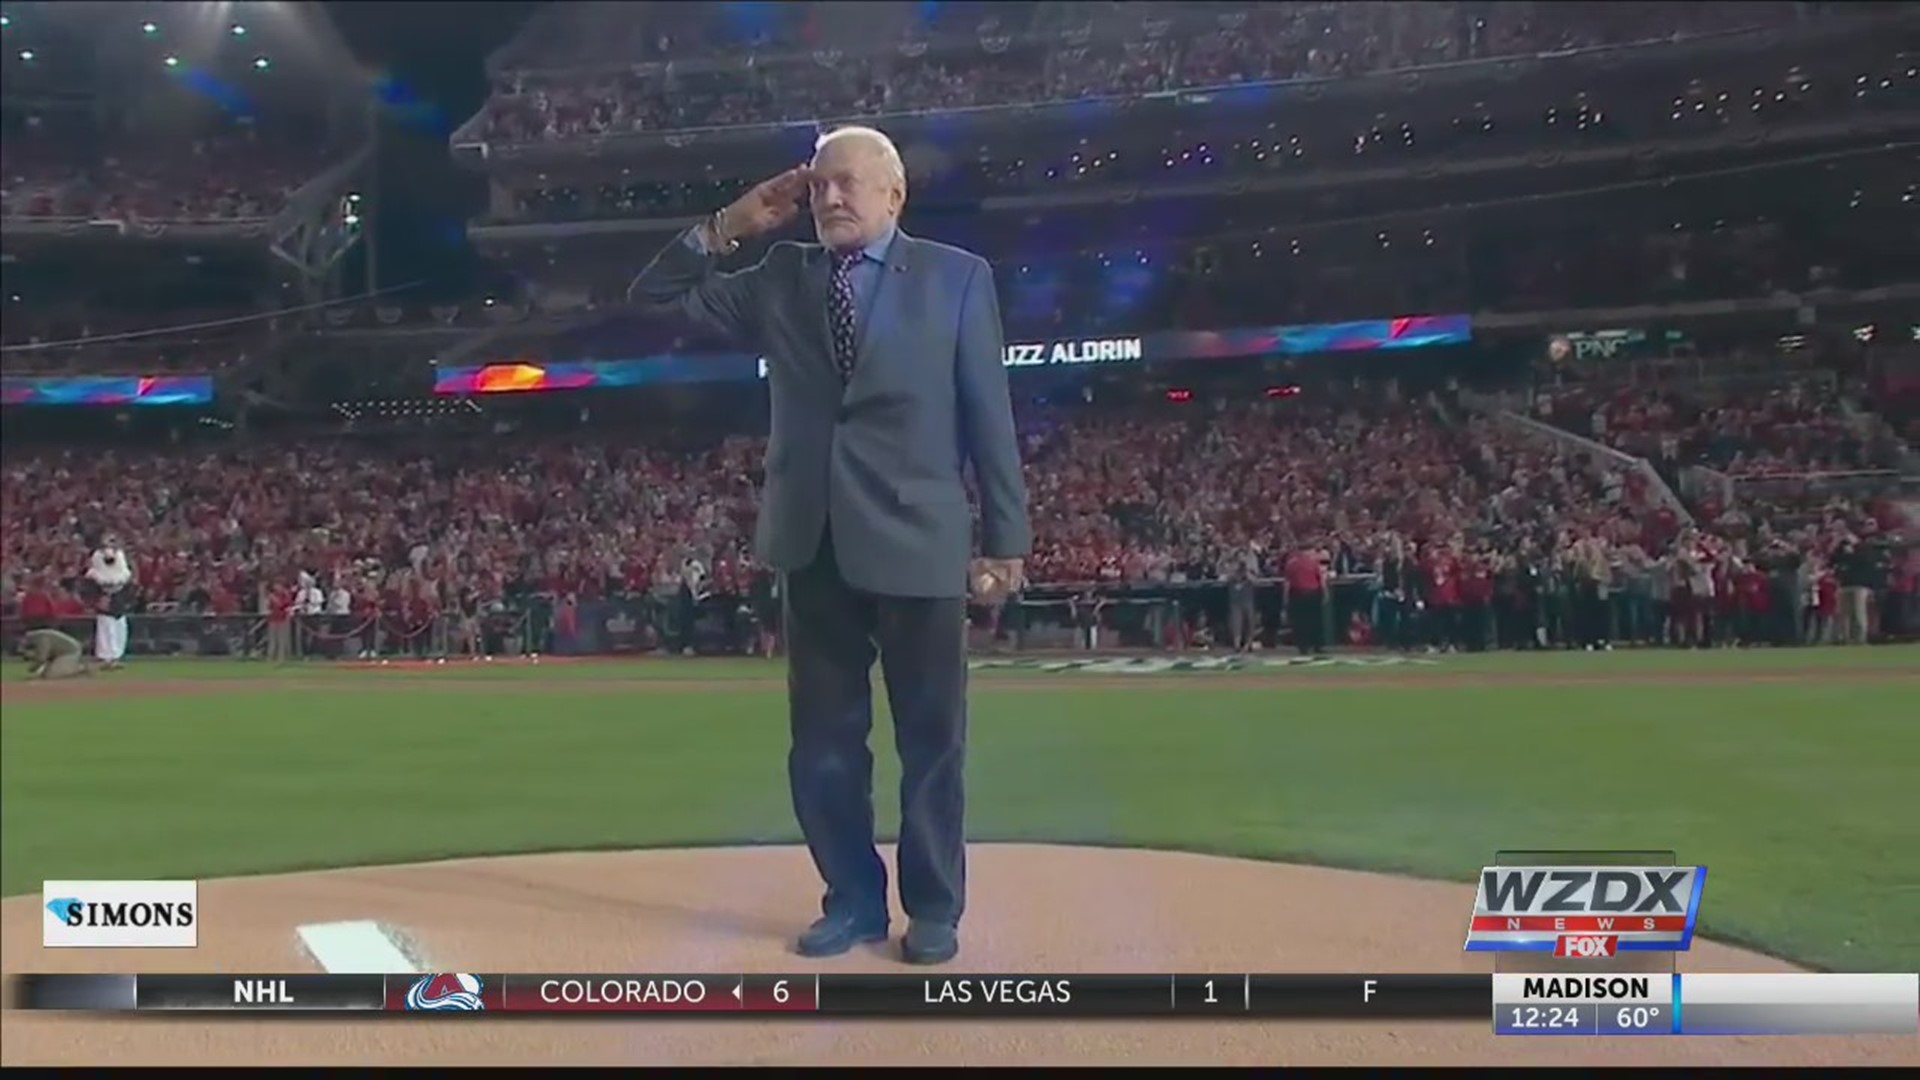 Buzz Aldrin threw the first pitch for Game 3 of the World Series between the Washington Nationals and the Houston Astros.